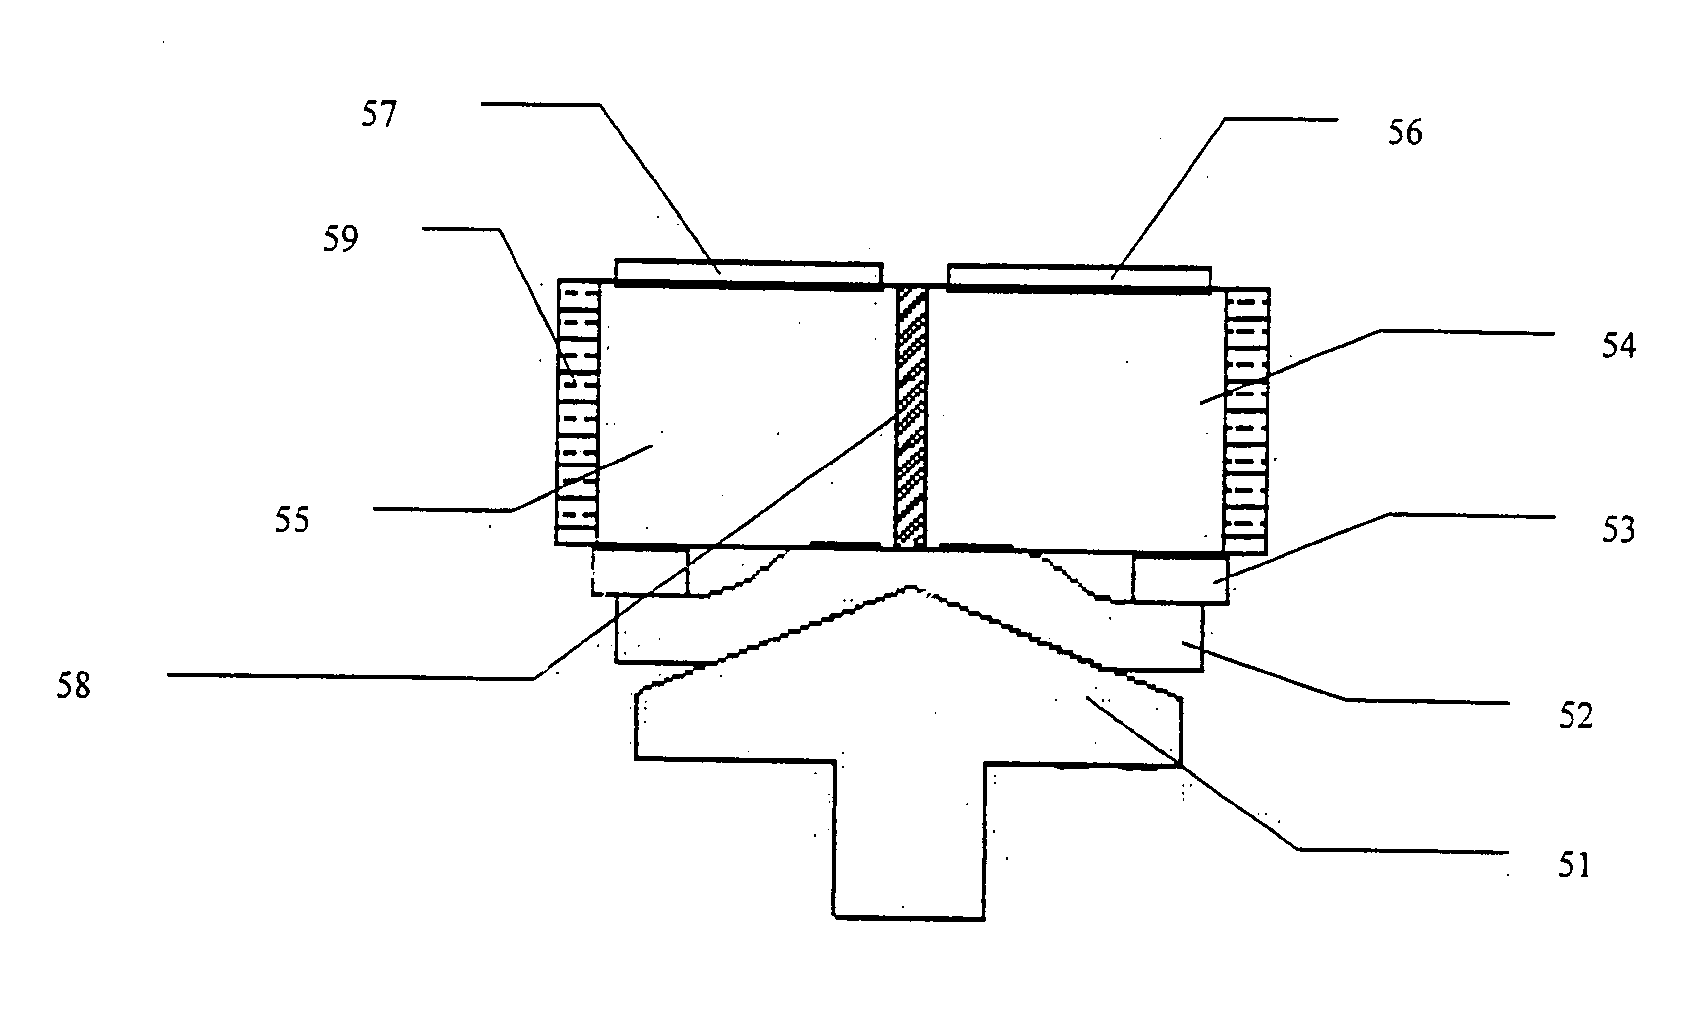 Device for varing capacitance